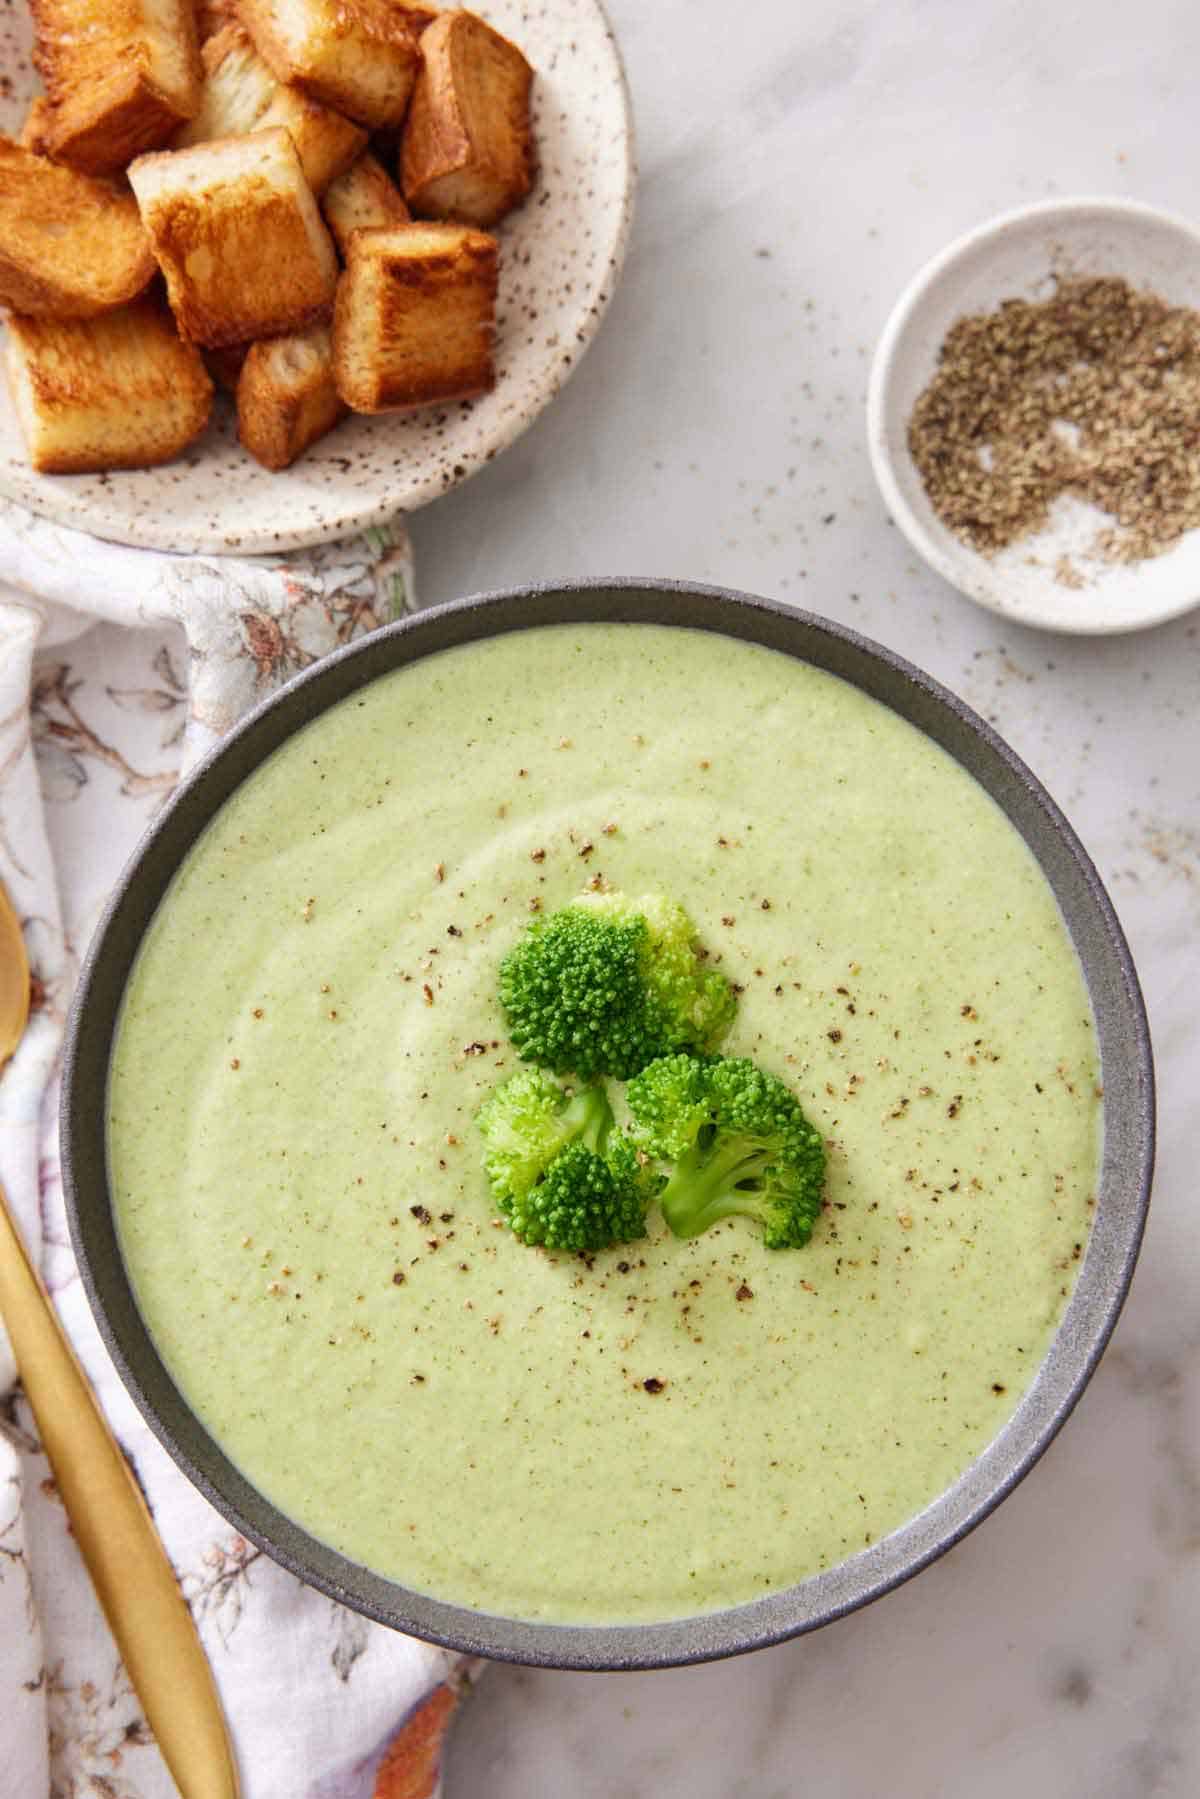 Overhead view of a bowl of cream of broccoli soup topped with three florets and some black pepper. Bowl of pepper and croutons off to the side.